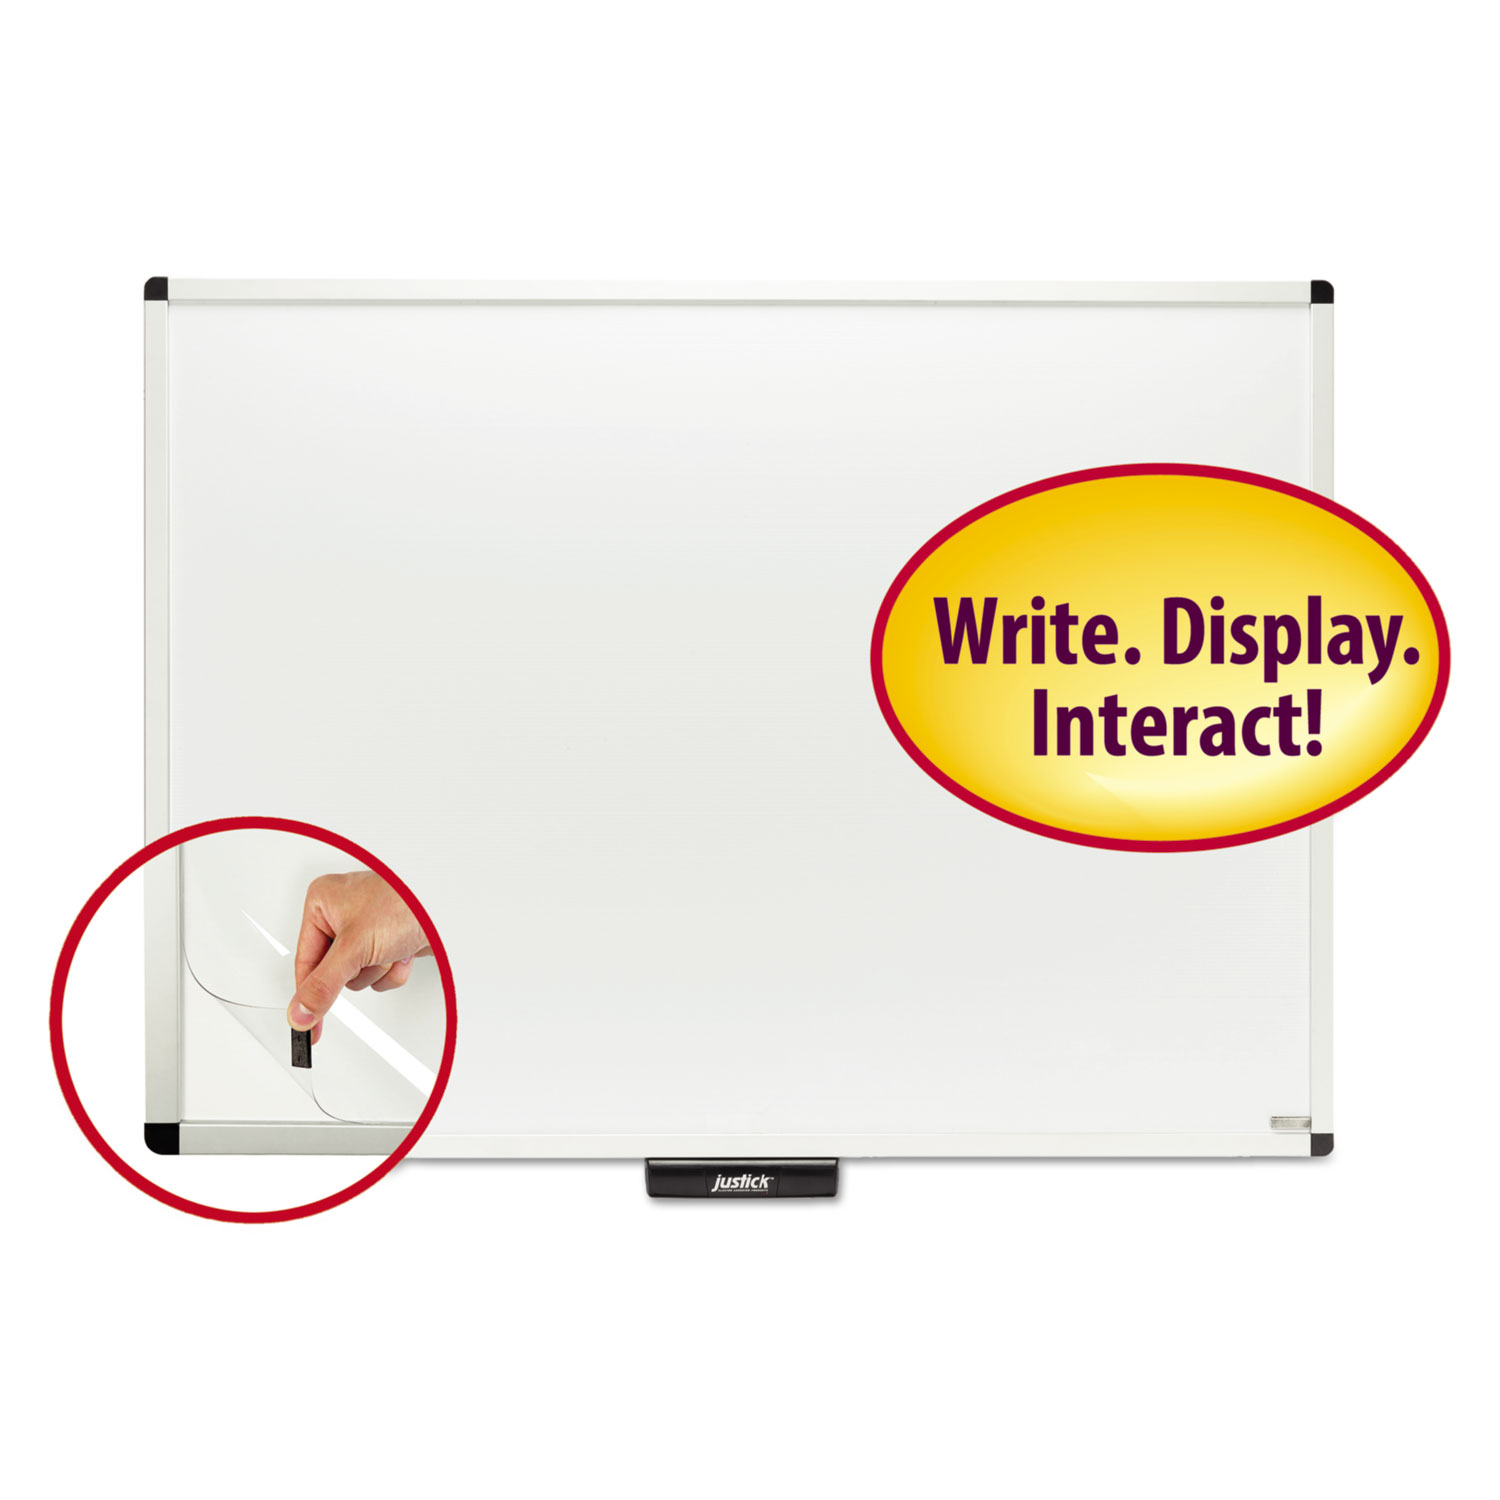  Smead 02572 Justick by Smead Dry-Erase Board with Frame, 48 x 36, White (SMD02572) 